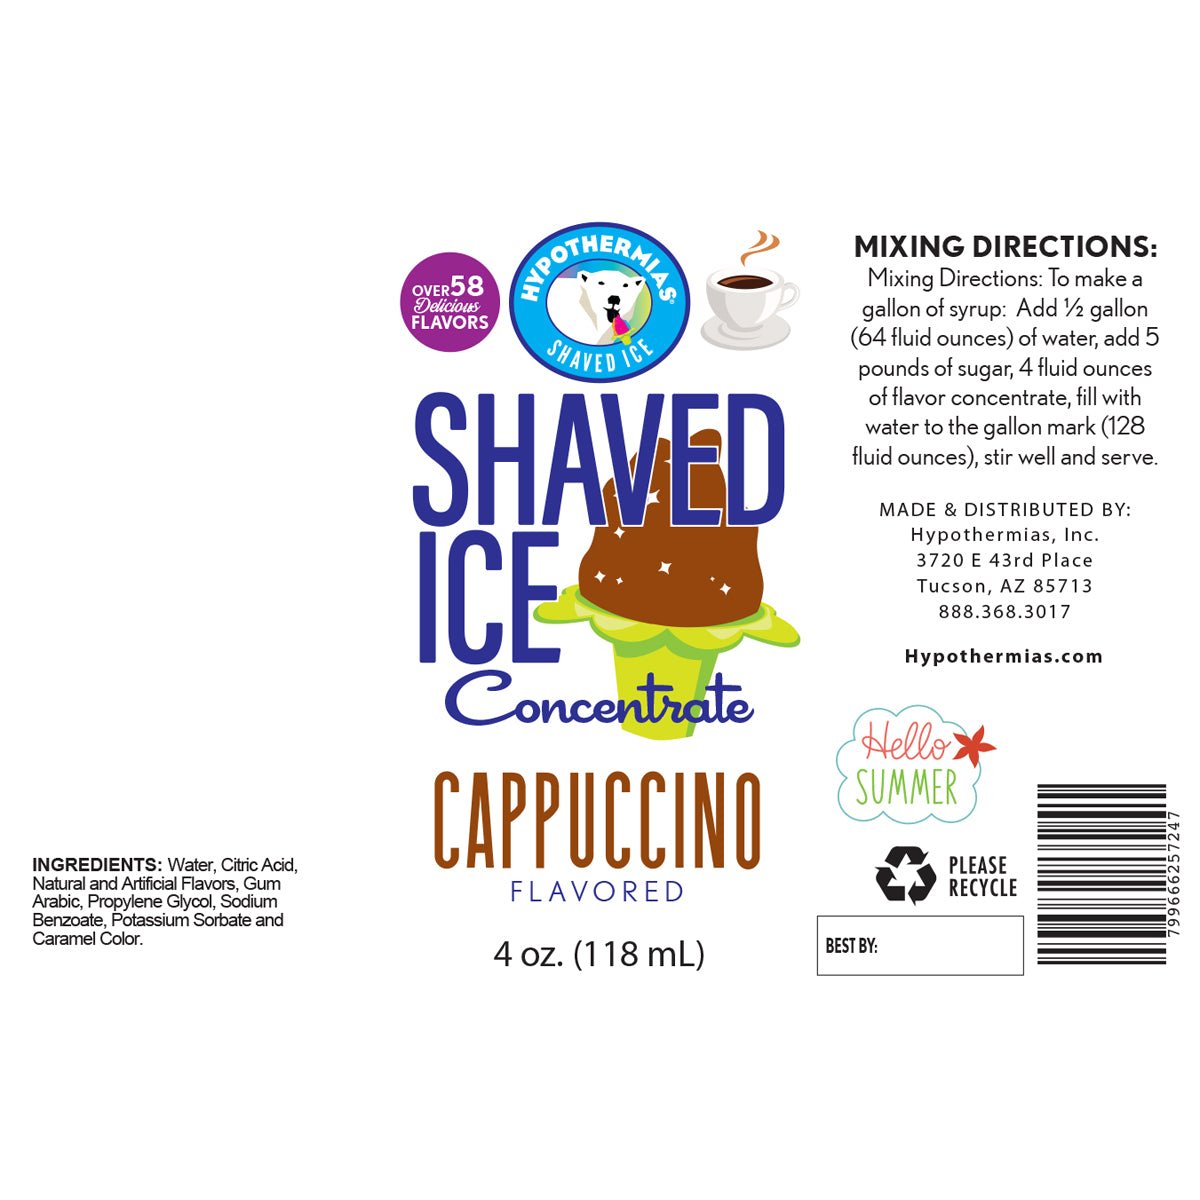 Hypothermias cappuccino shaved ice or snow cone flavor syrup concentrate ingredients.